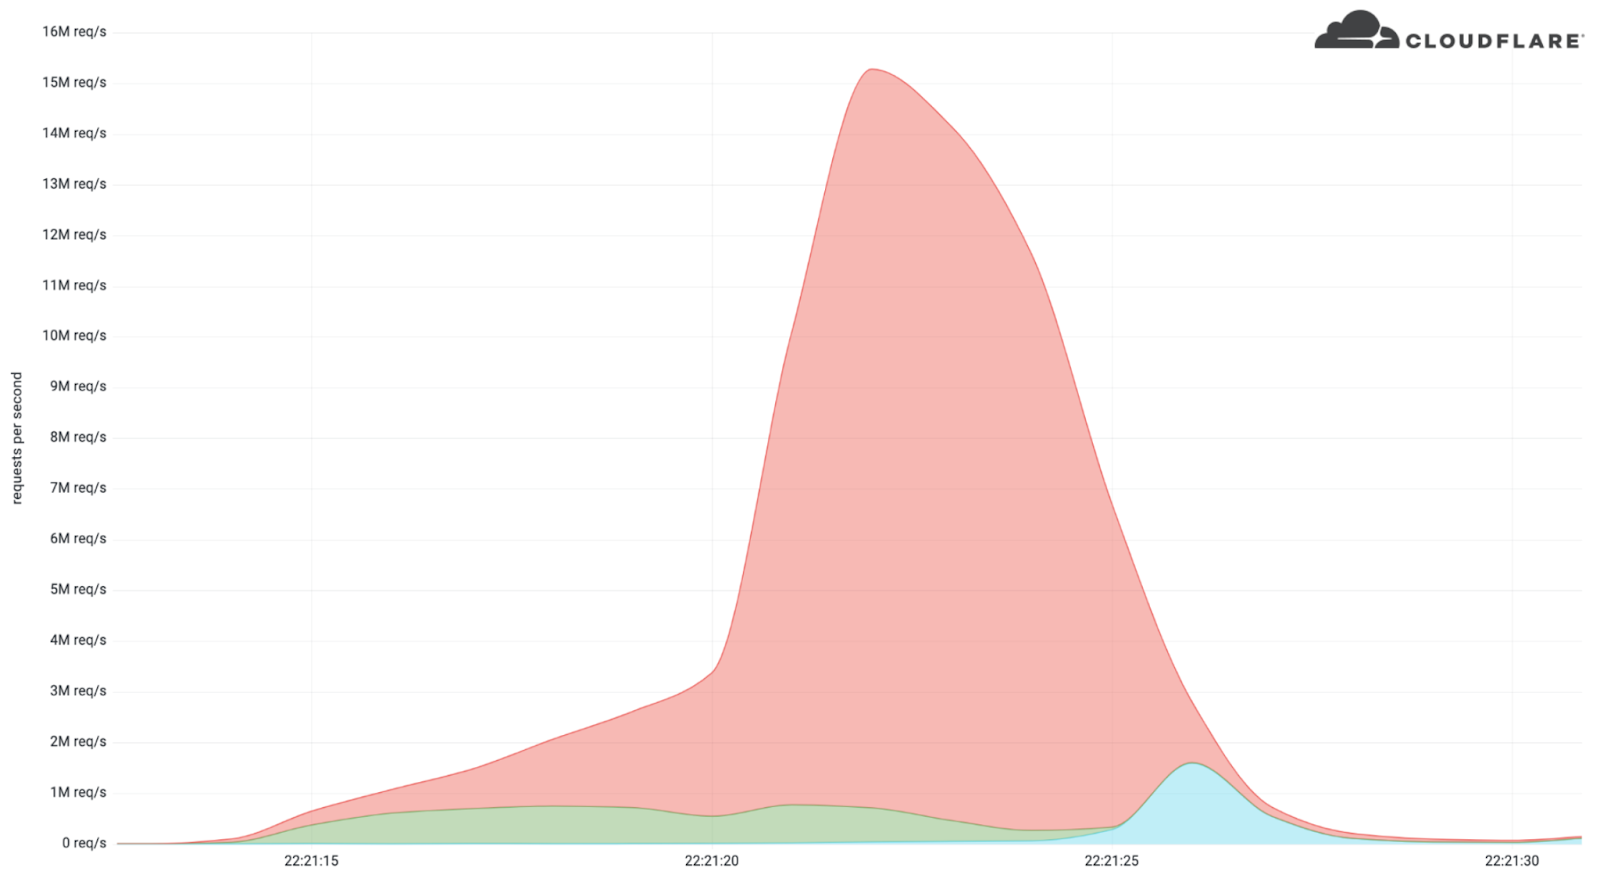 A colored diagram showing the DDoS attack rps on the y-axis and the timestamp on the x-axis